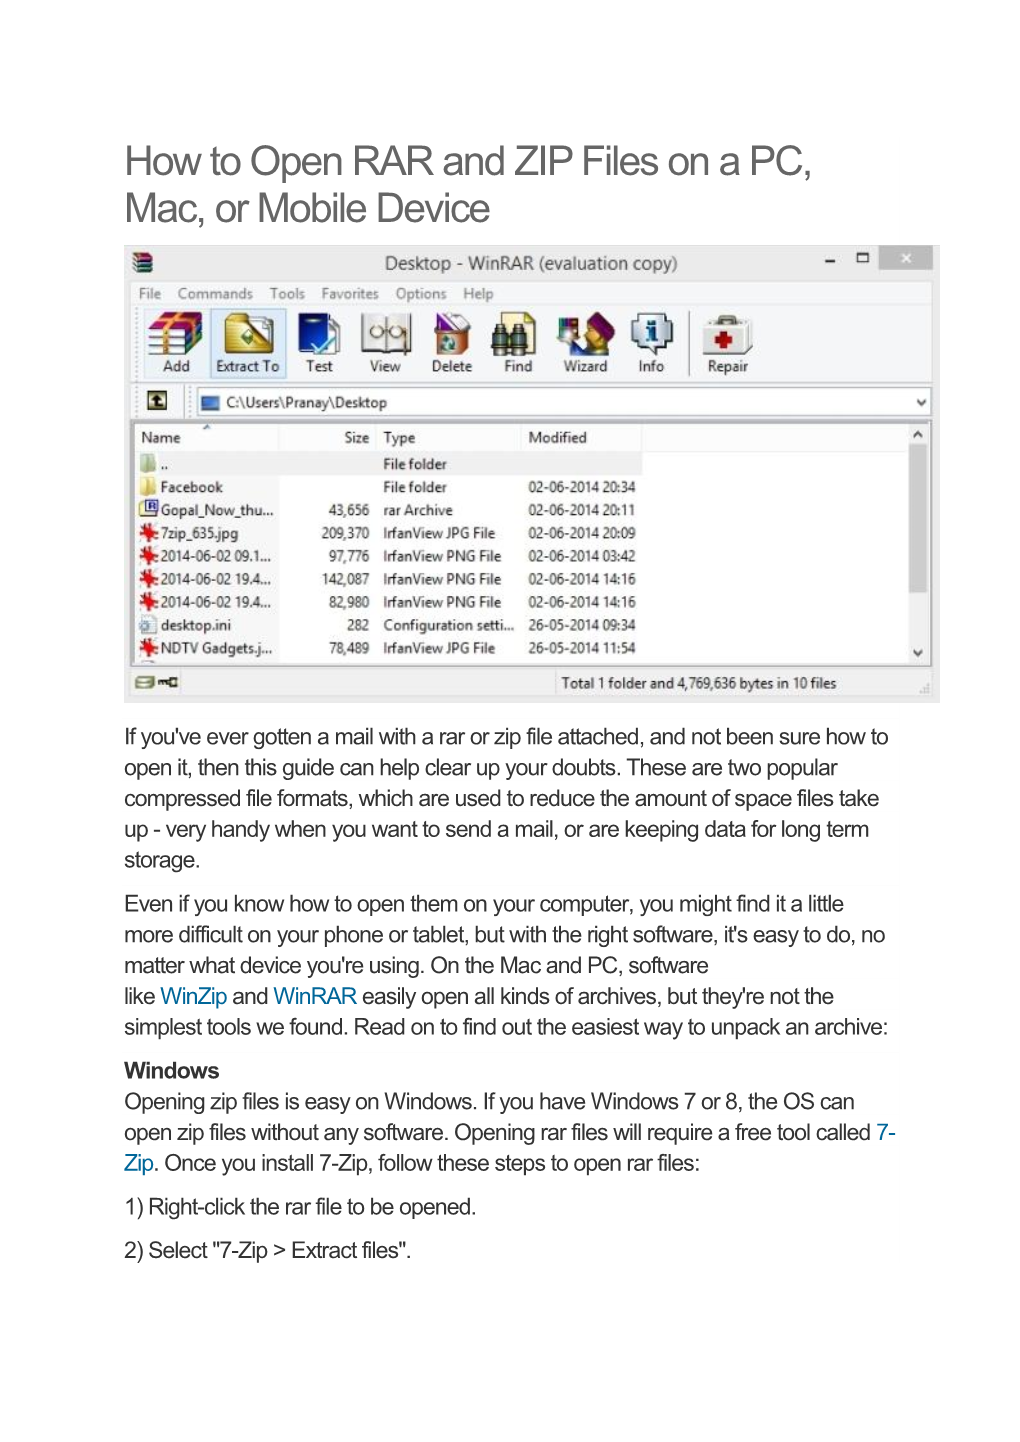 How to Open RAR and ZIP Files on a PC, Mac, Or Mobile Device